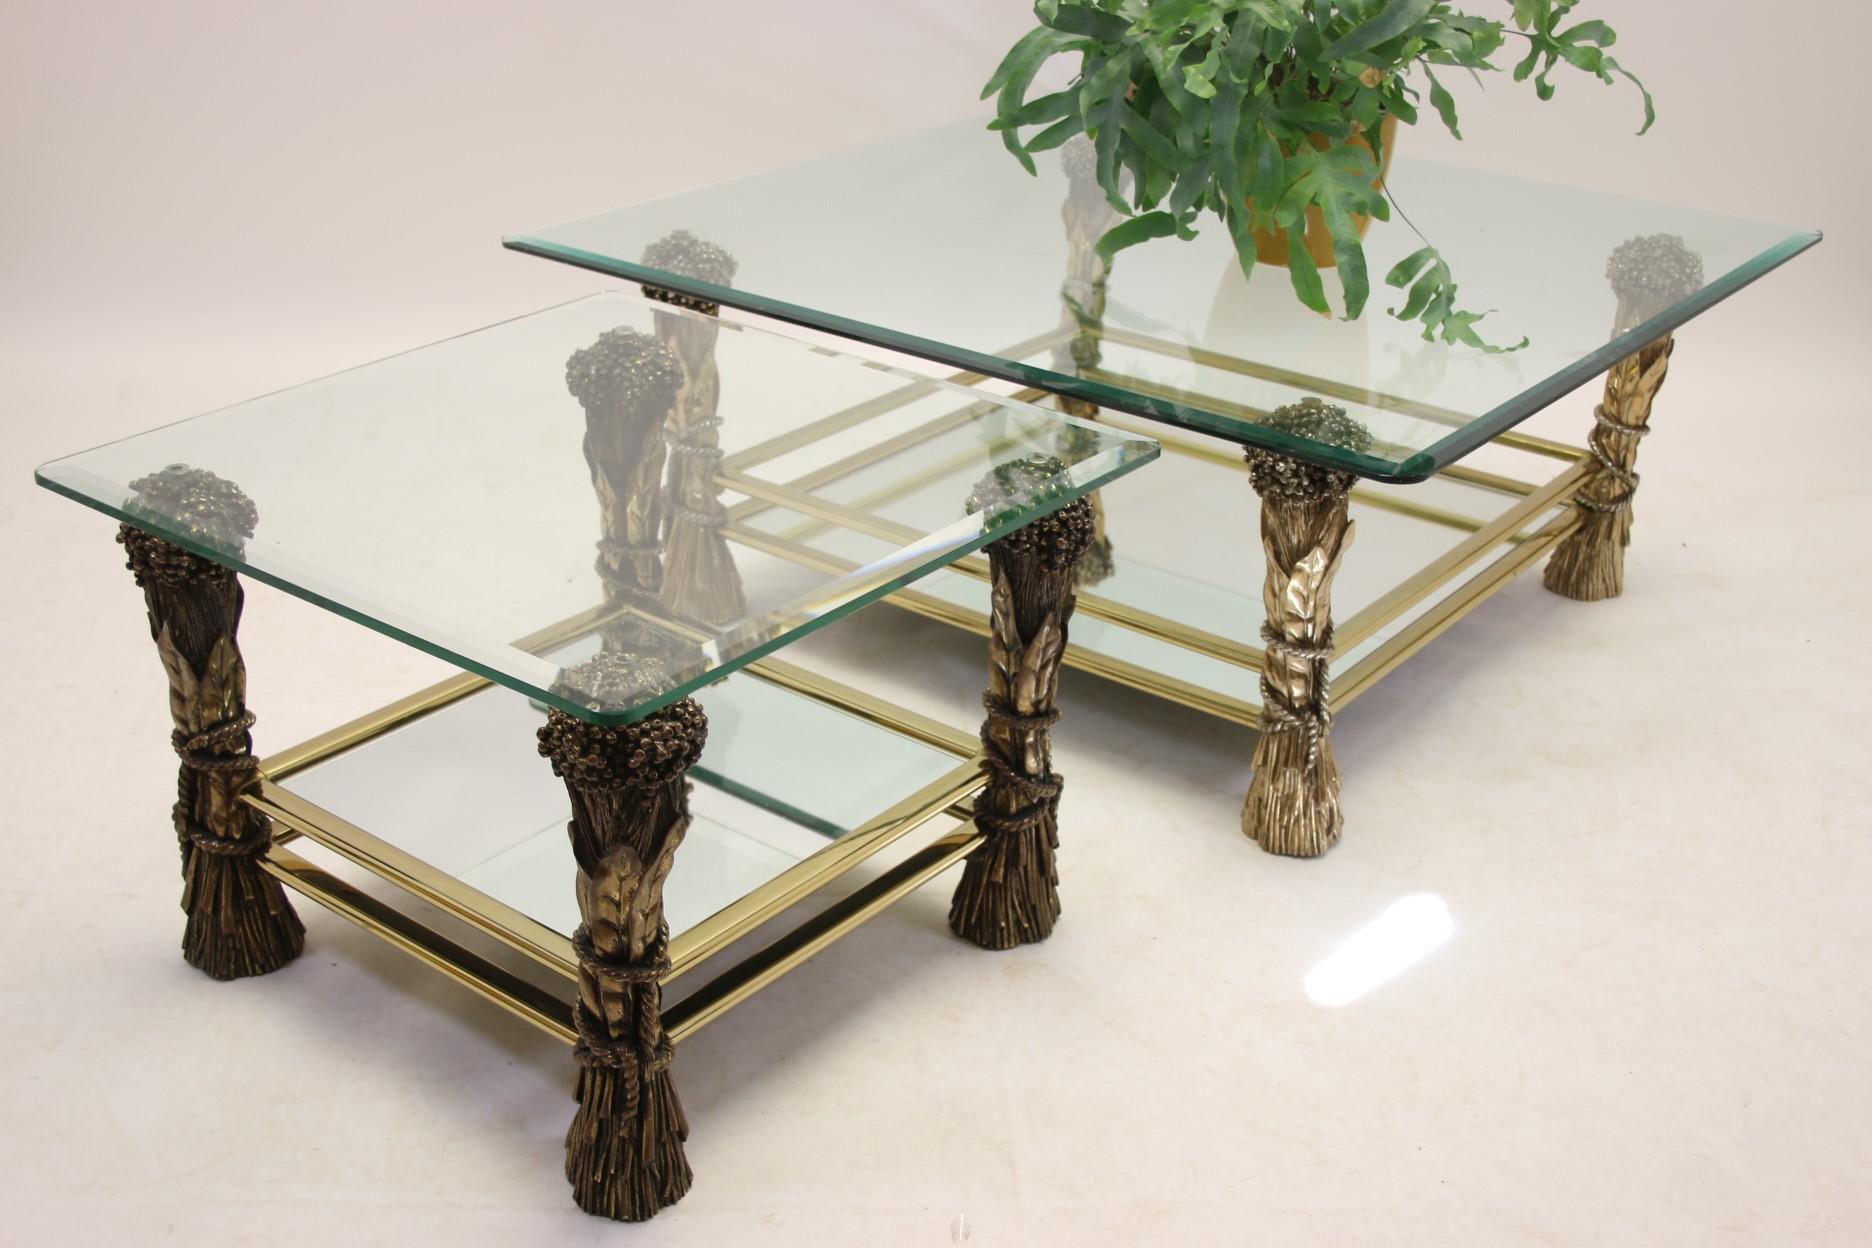 A beautiful set of a coffee table with a matching side table. This set was made in France in the 70s. 

Both tables are made in the classic Hollywood Regency style. This can be recognized by the combination of glass with fine gold-coloured